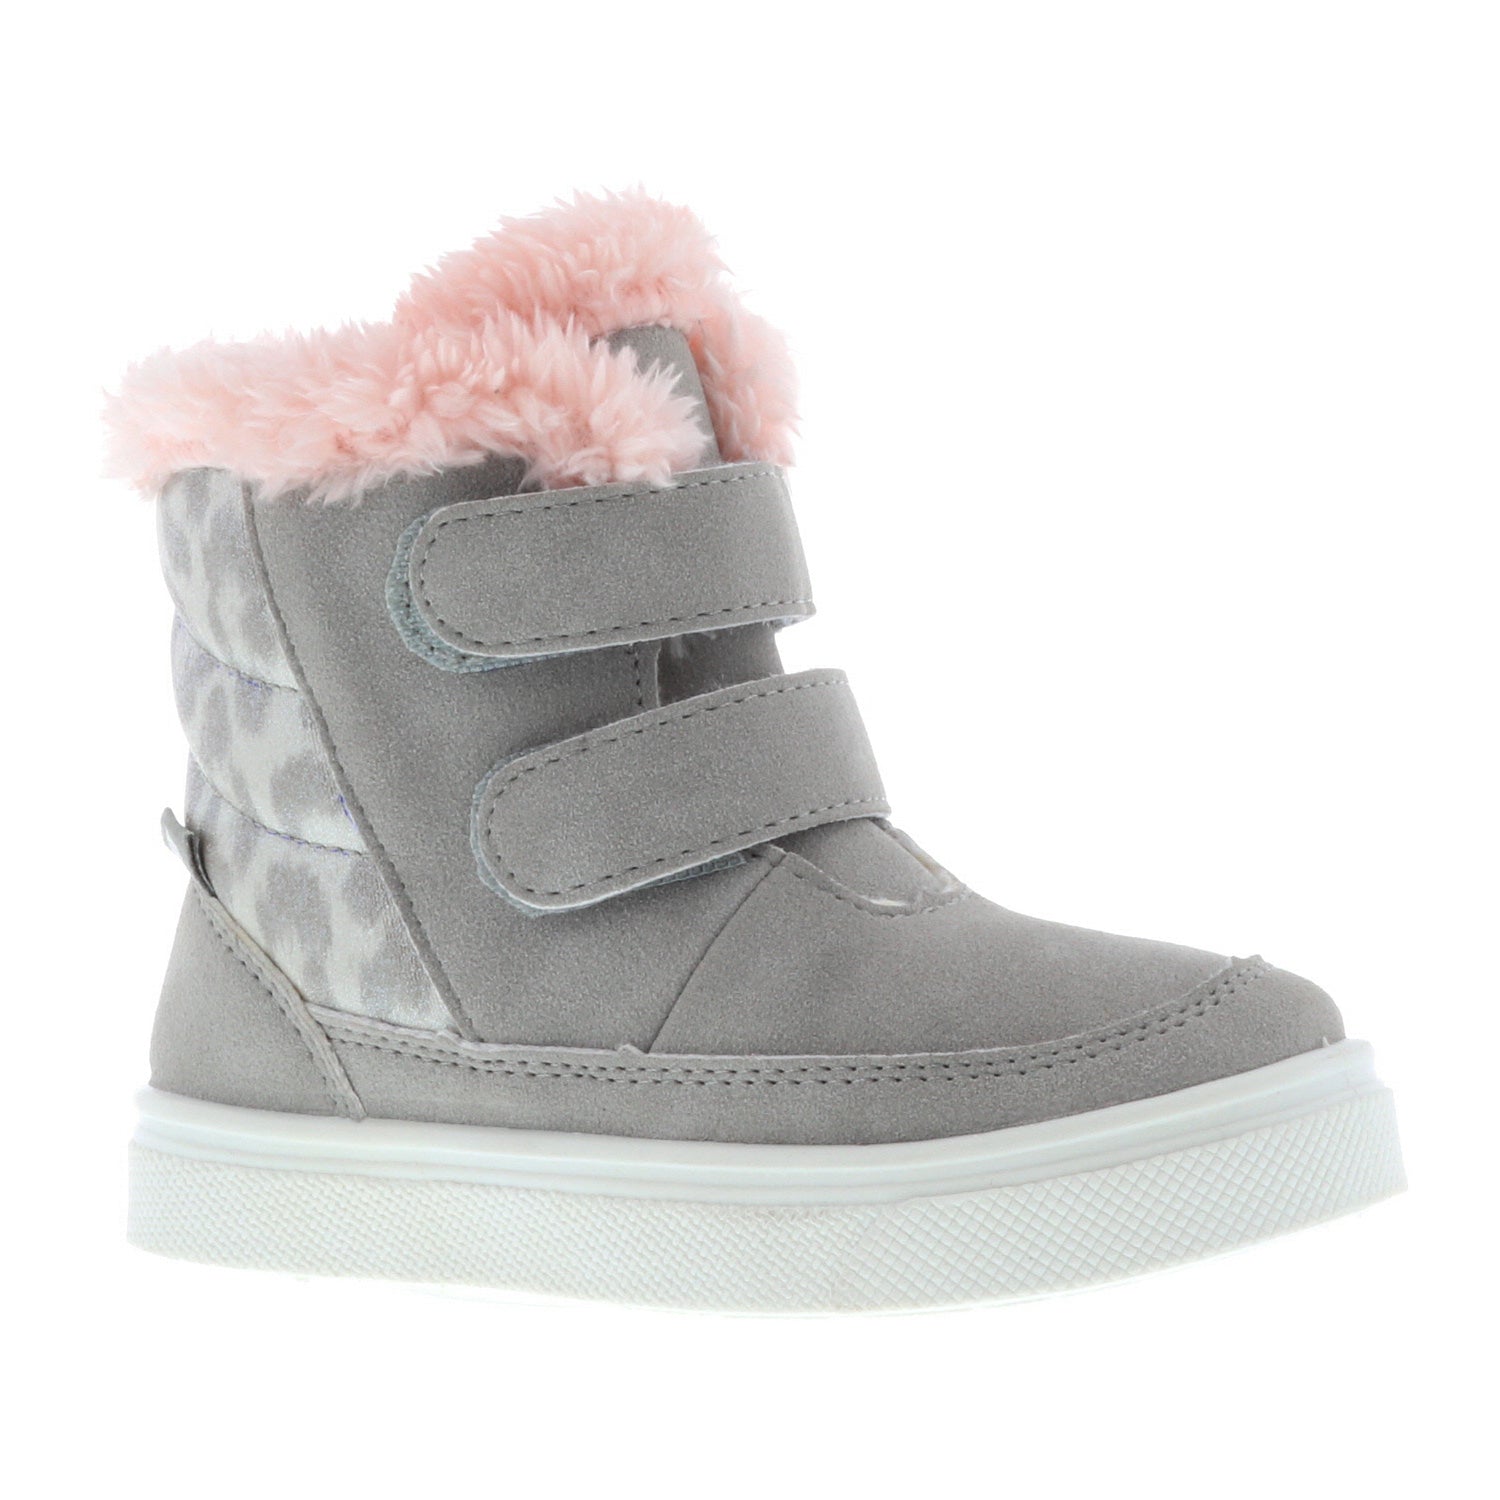 Oomphies Toddler Girl's Charlie Winter Boots